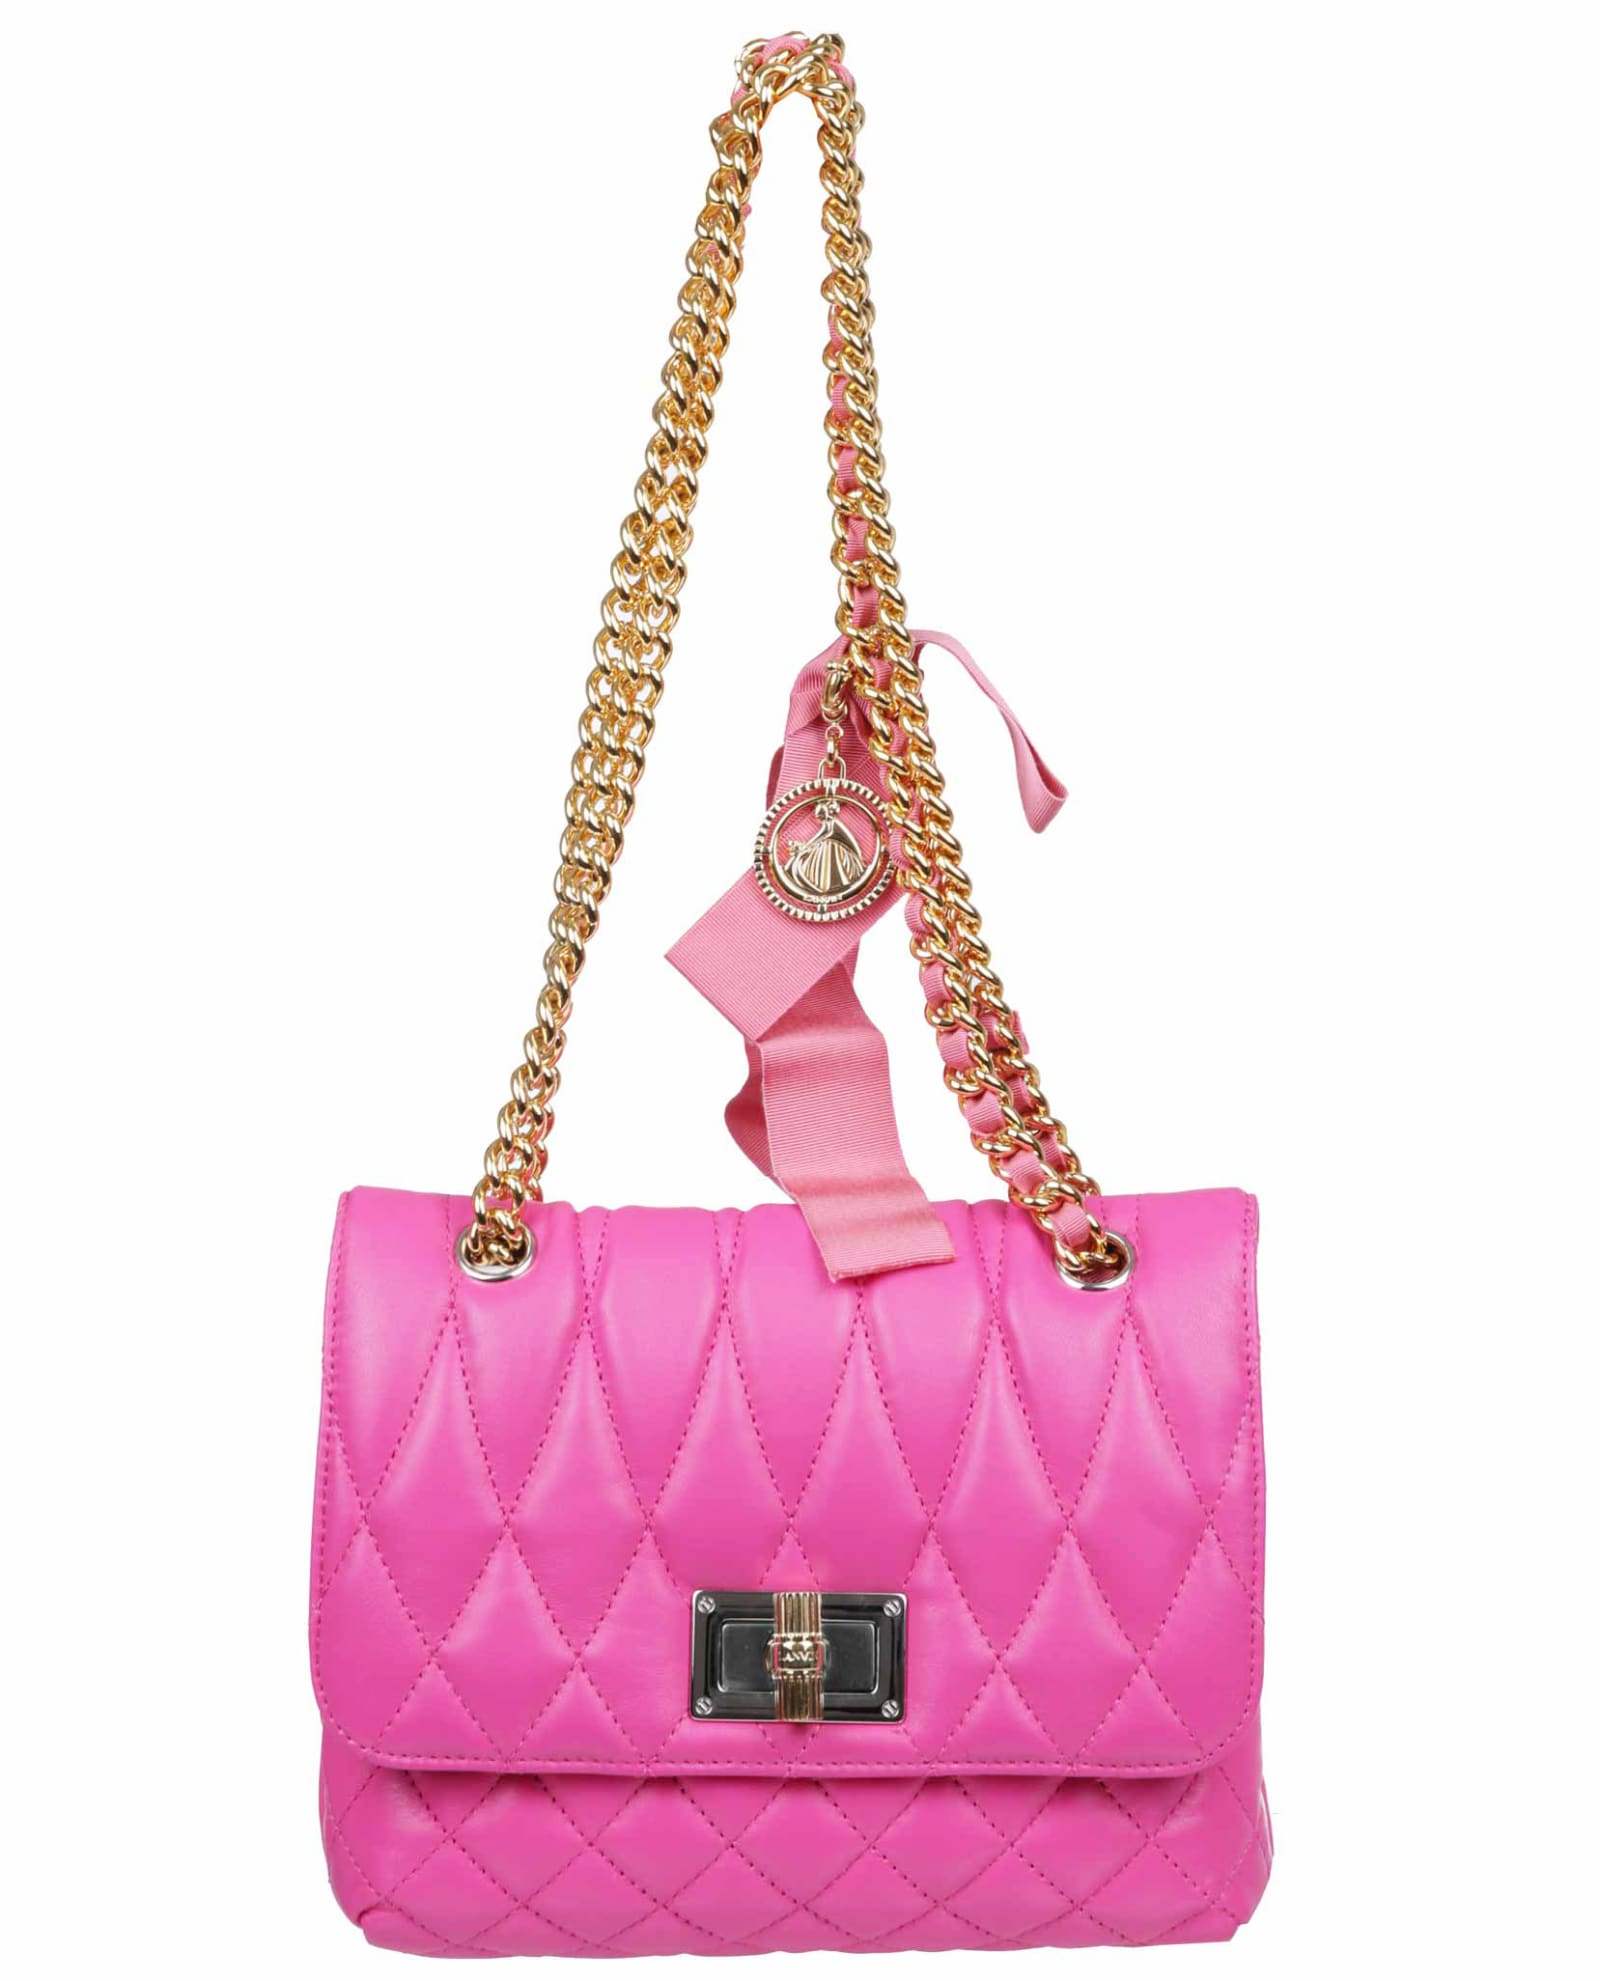 Lanvin Fuchsia Quilted Leather Mini Shoulder Bag